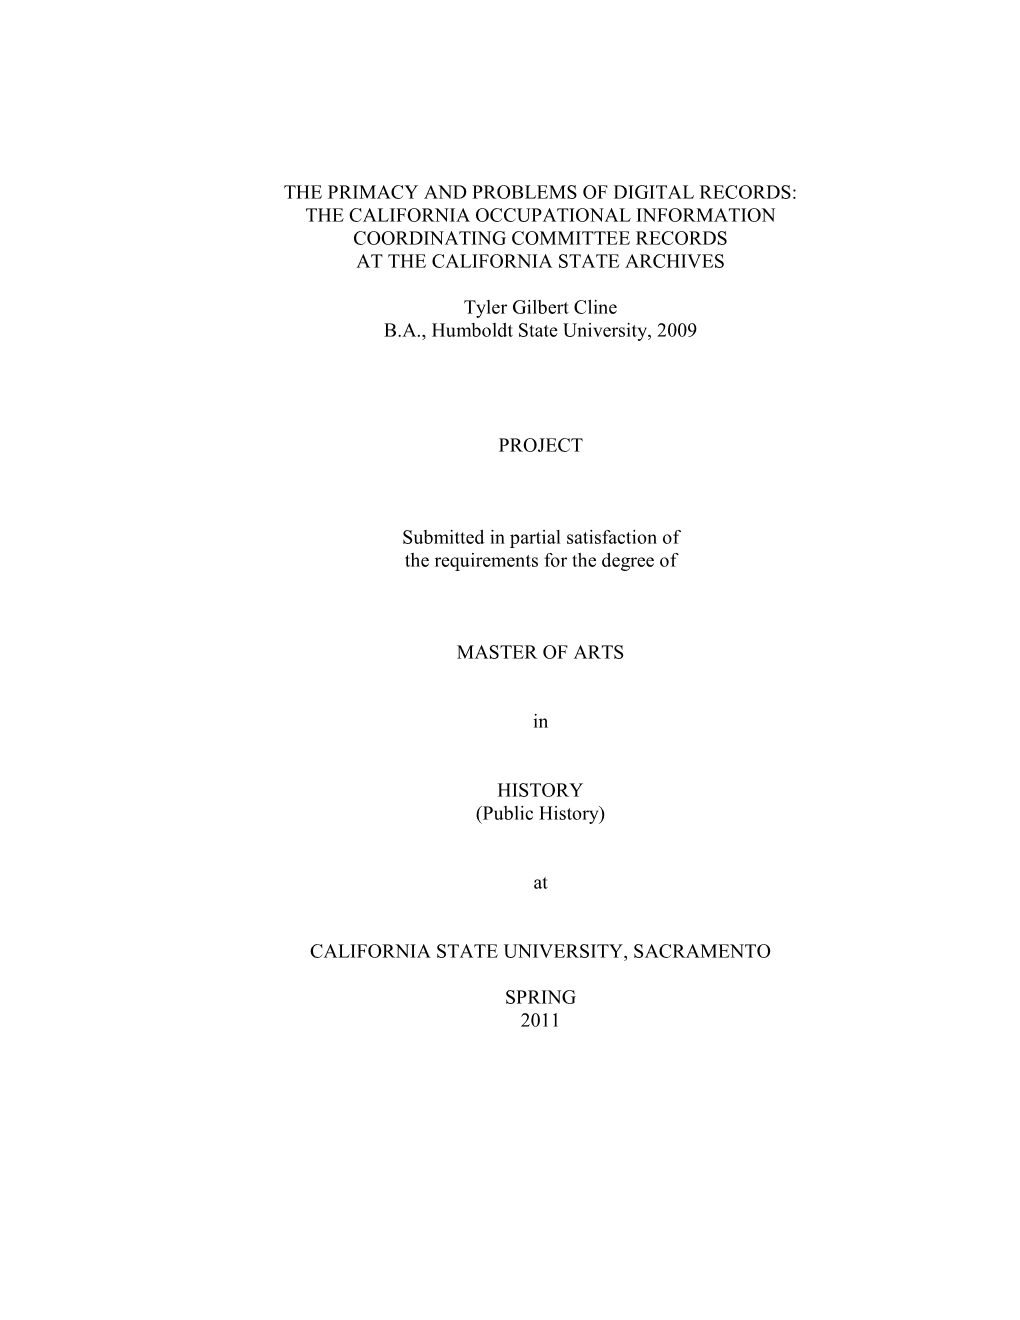 The Primacy and Problems of Digital Records: the California Occupational Information Coordinating Committee Records at the California State Archives